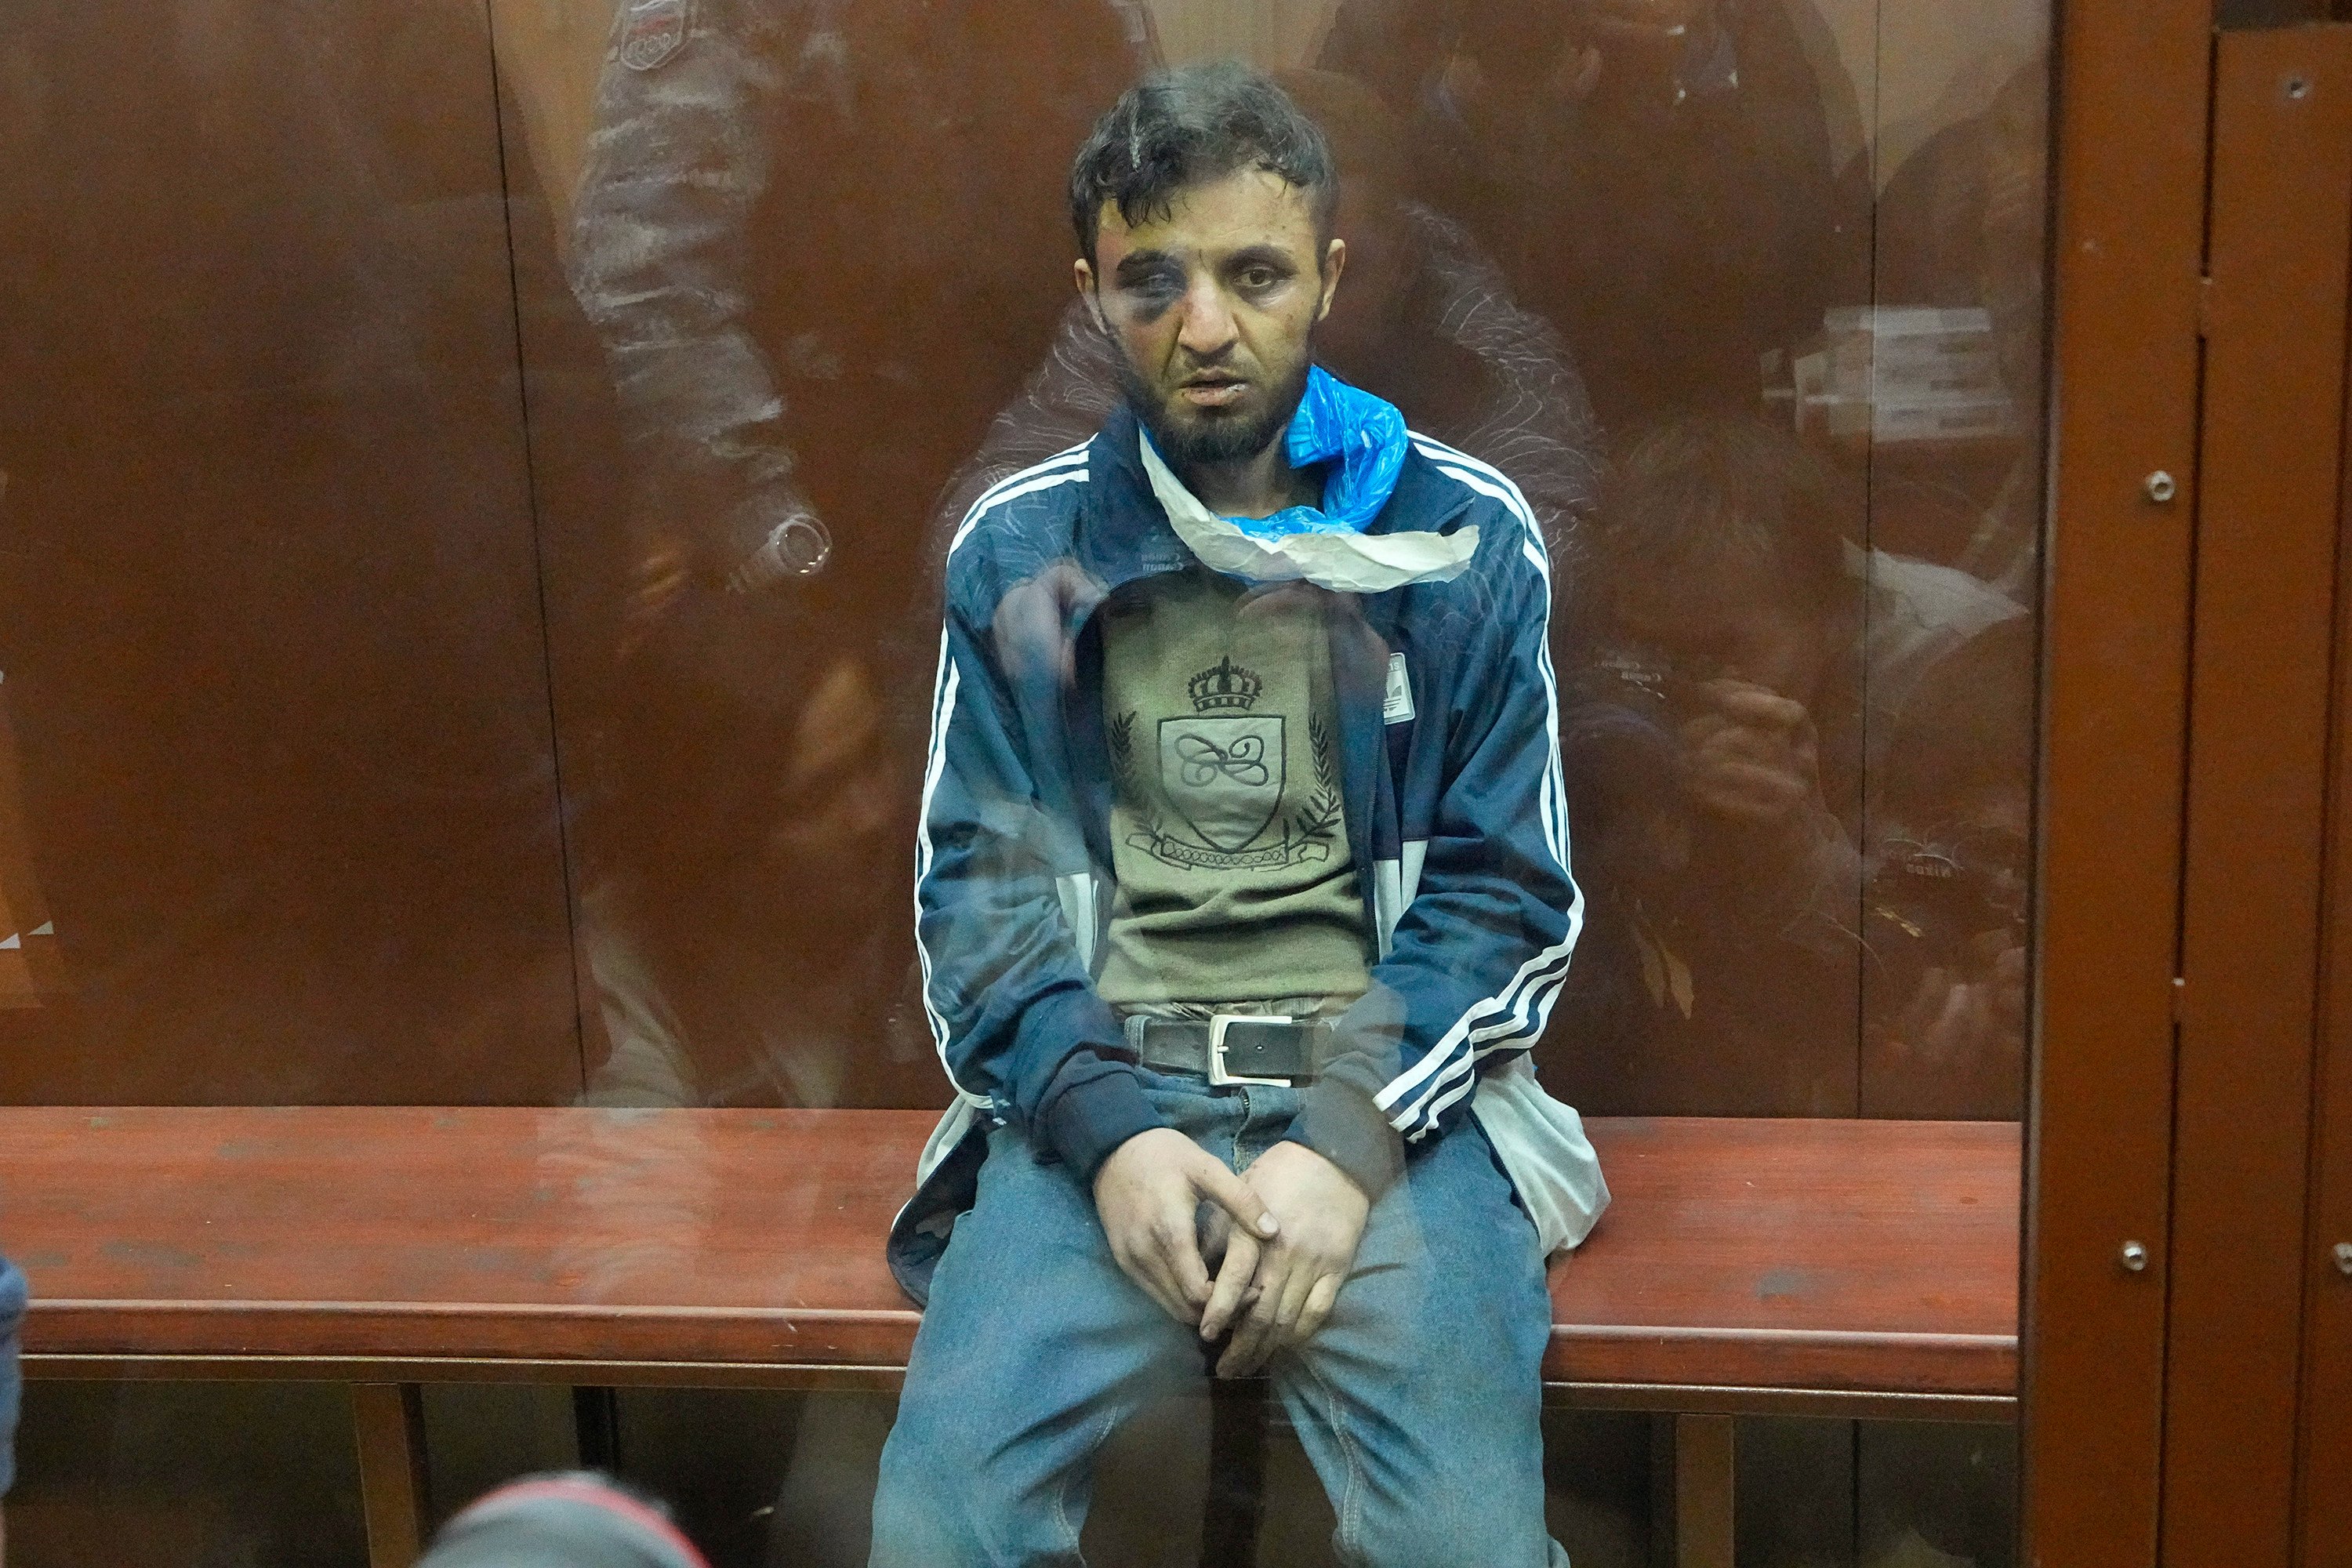 Dalerdzhon Mirzoyev, a suspect in Friday’s Crocus City Hall shooting, sits in a glass cage in the Basmanny District Court in Moscow, Russia on Sunday. Photo: AP 